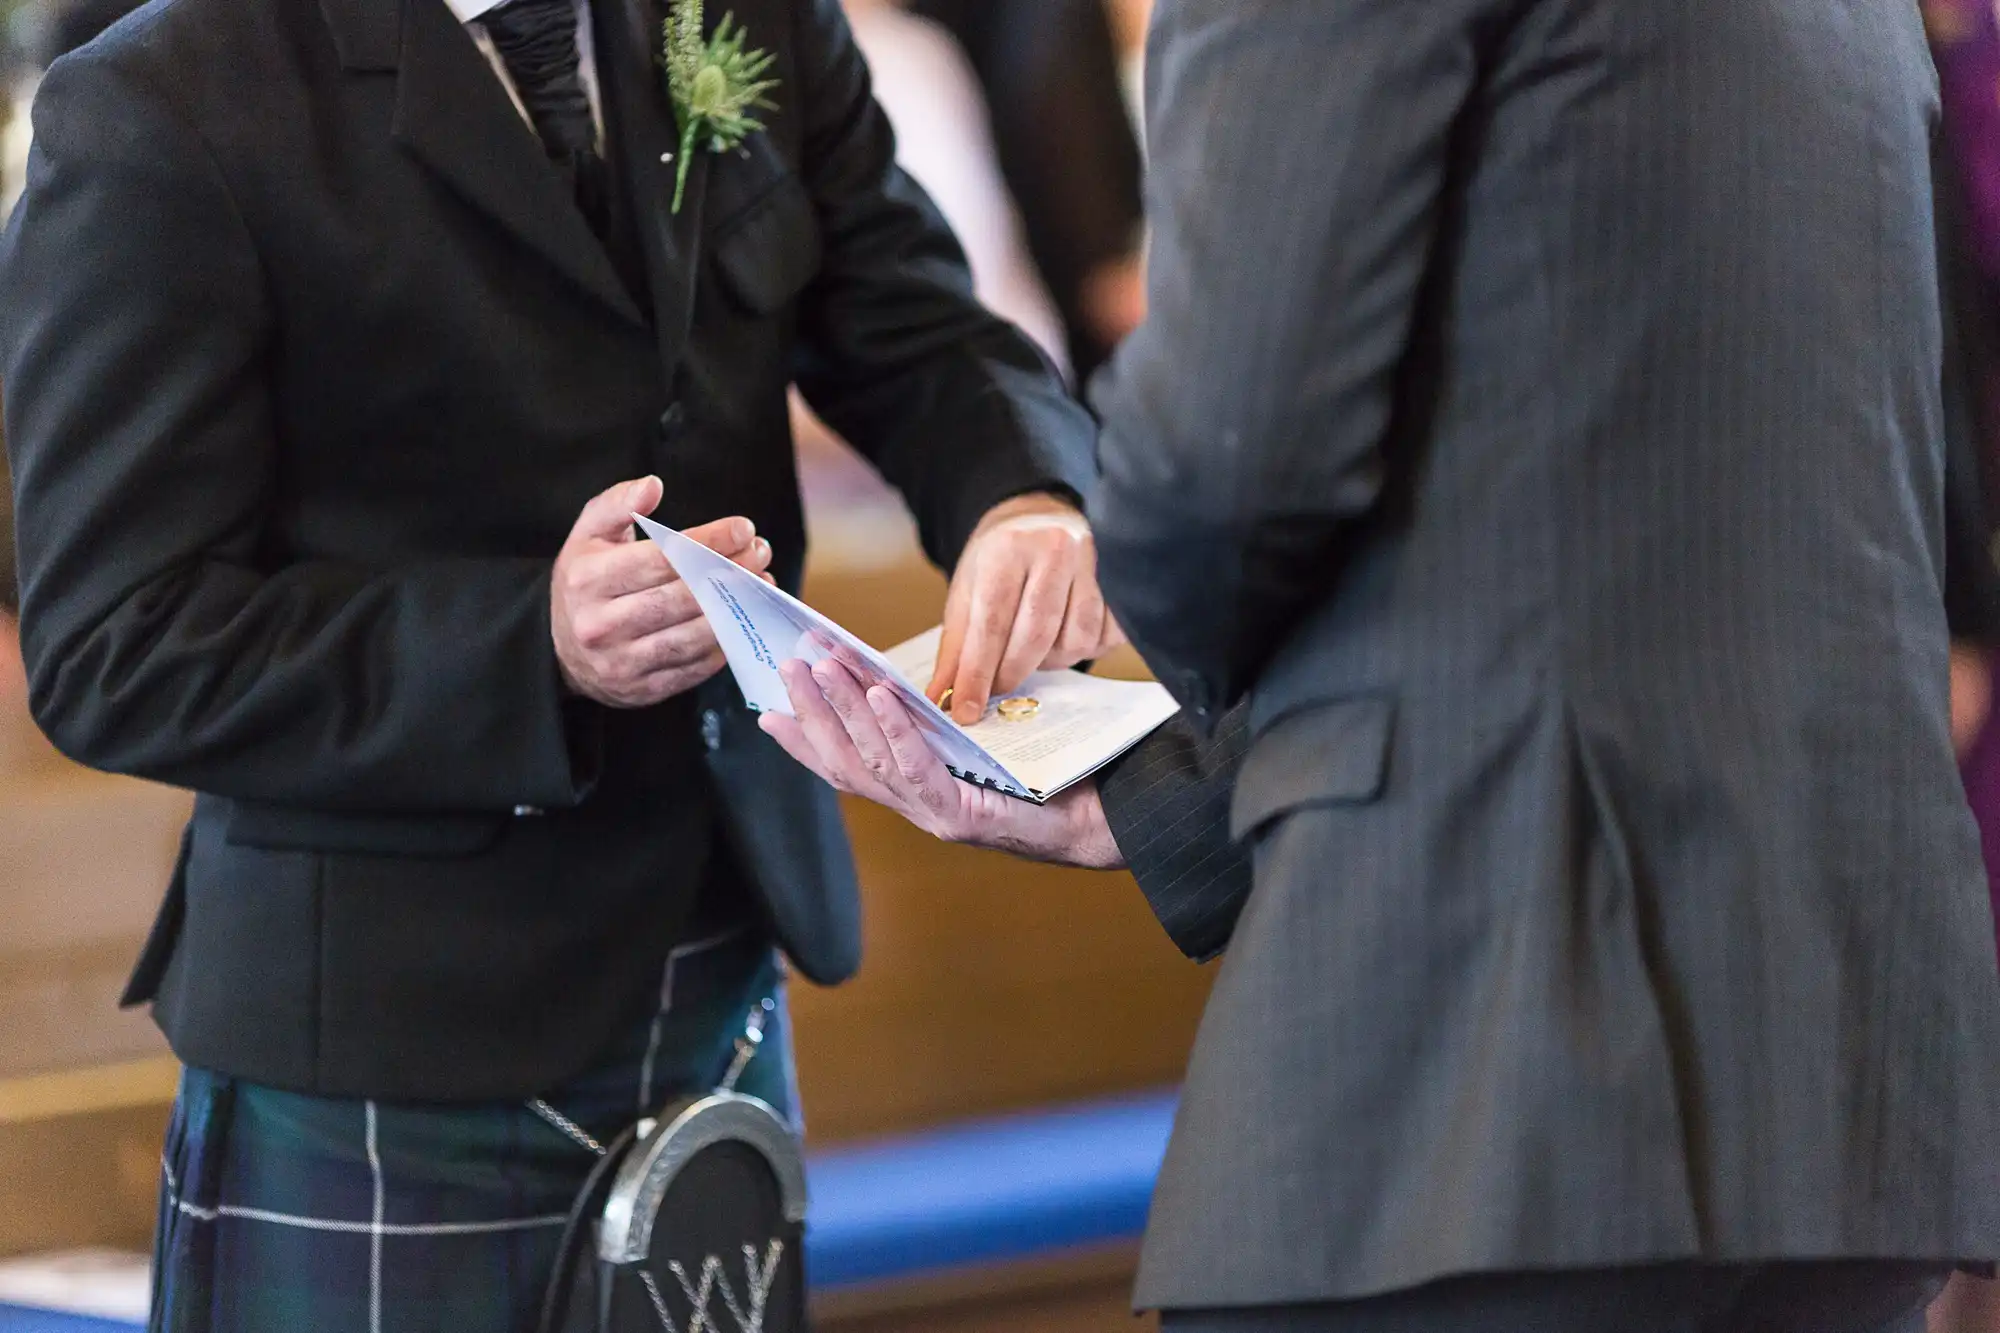 Two men exchanging wedding rings and vows, one wearing a kilt, during a ceremony indoors.